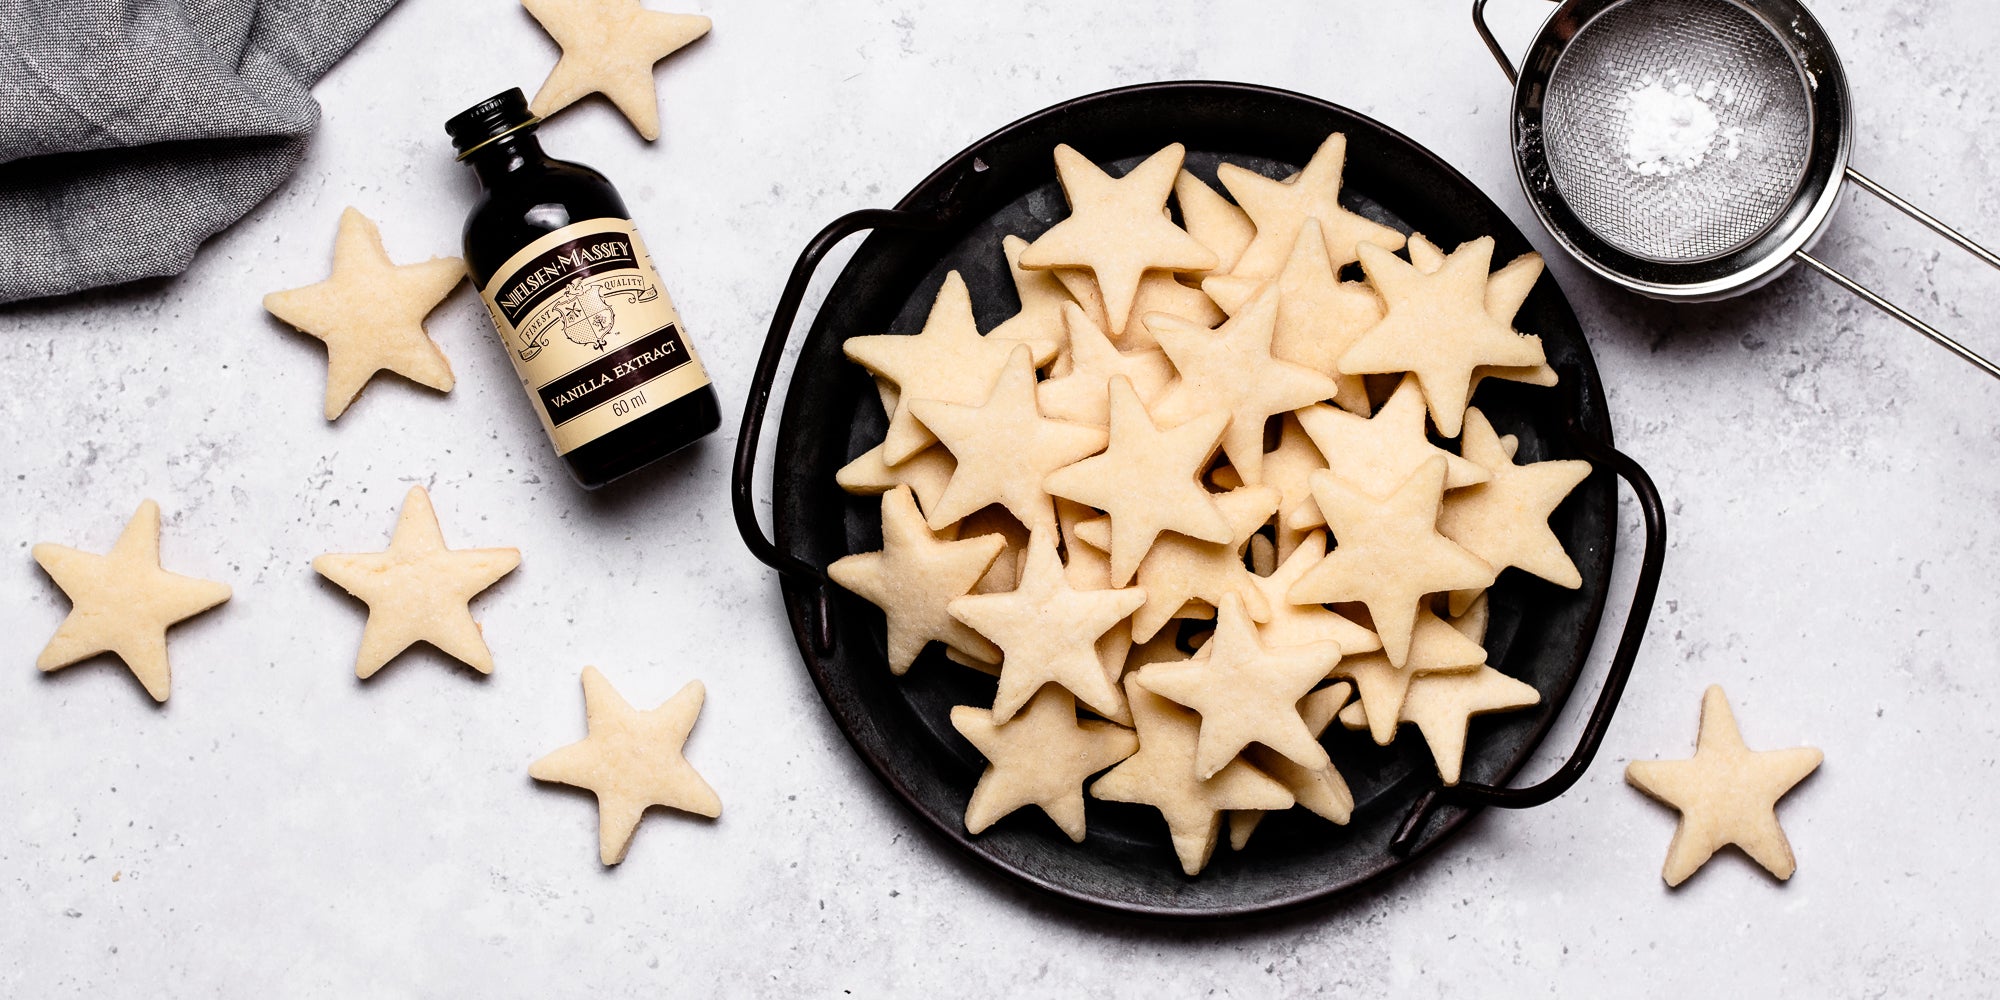 Top down view of star shaped vegan biscuits in a bowl